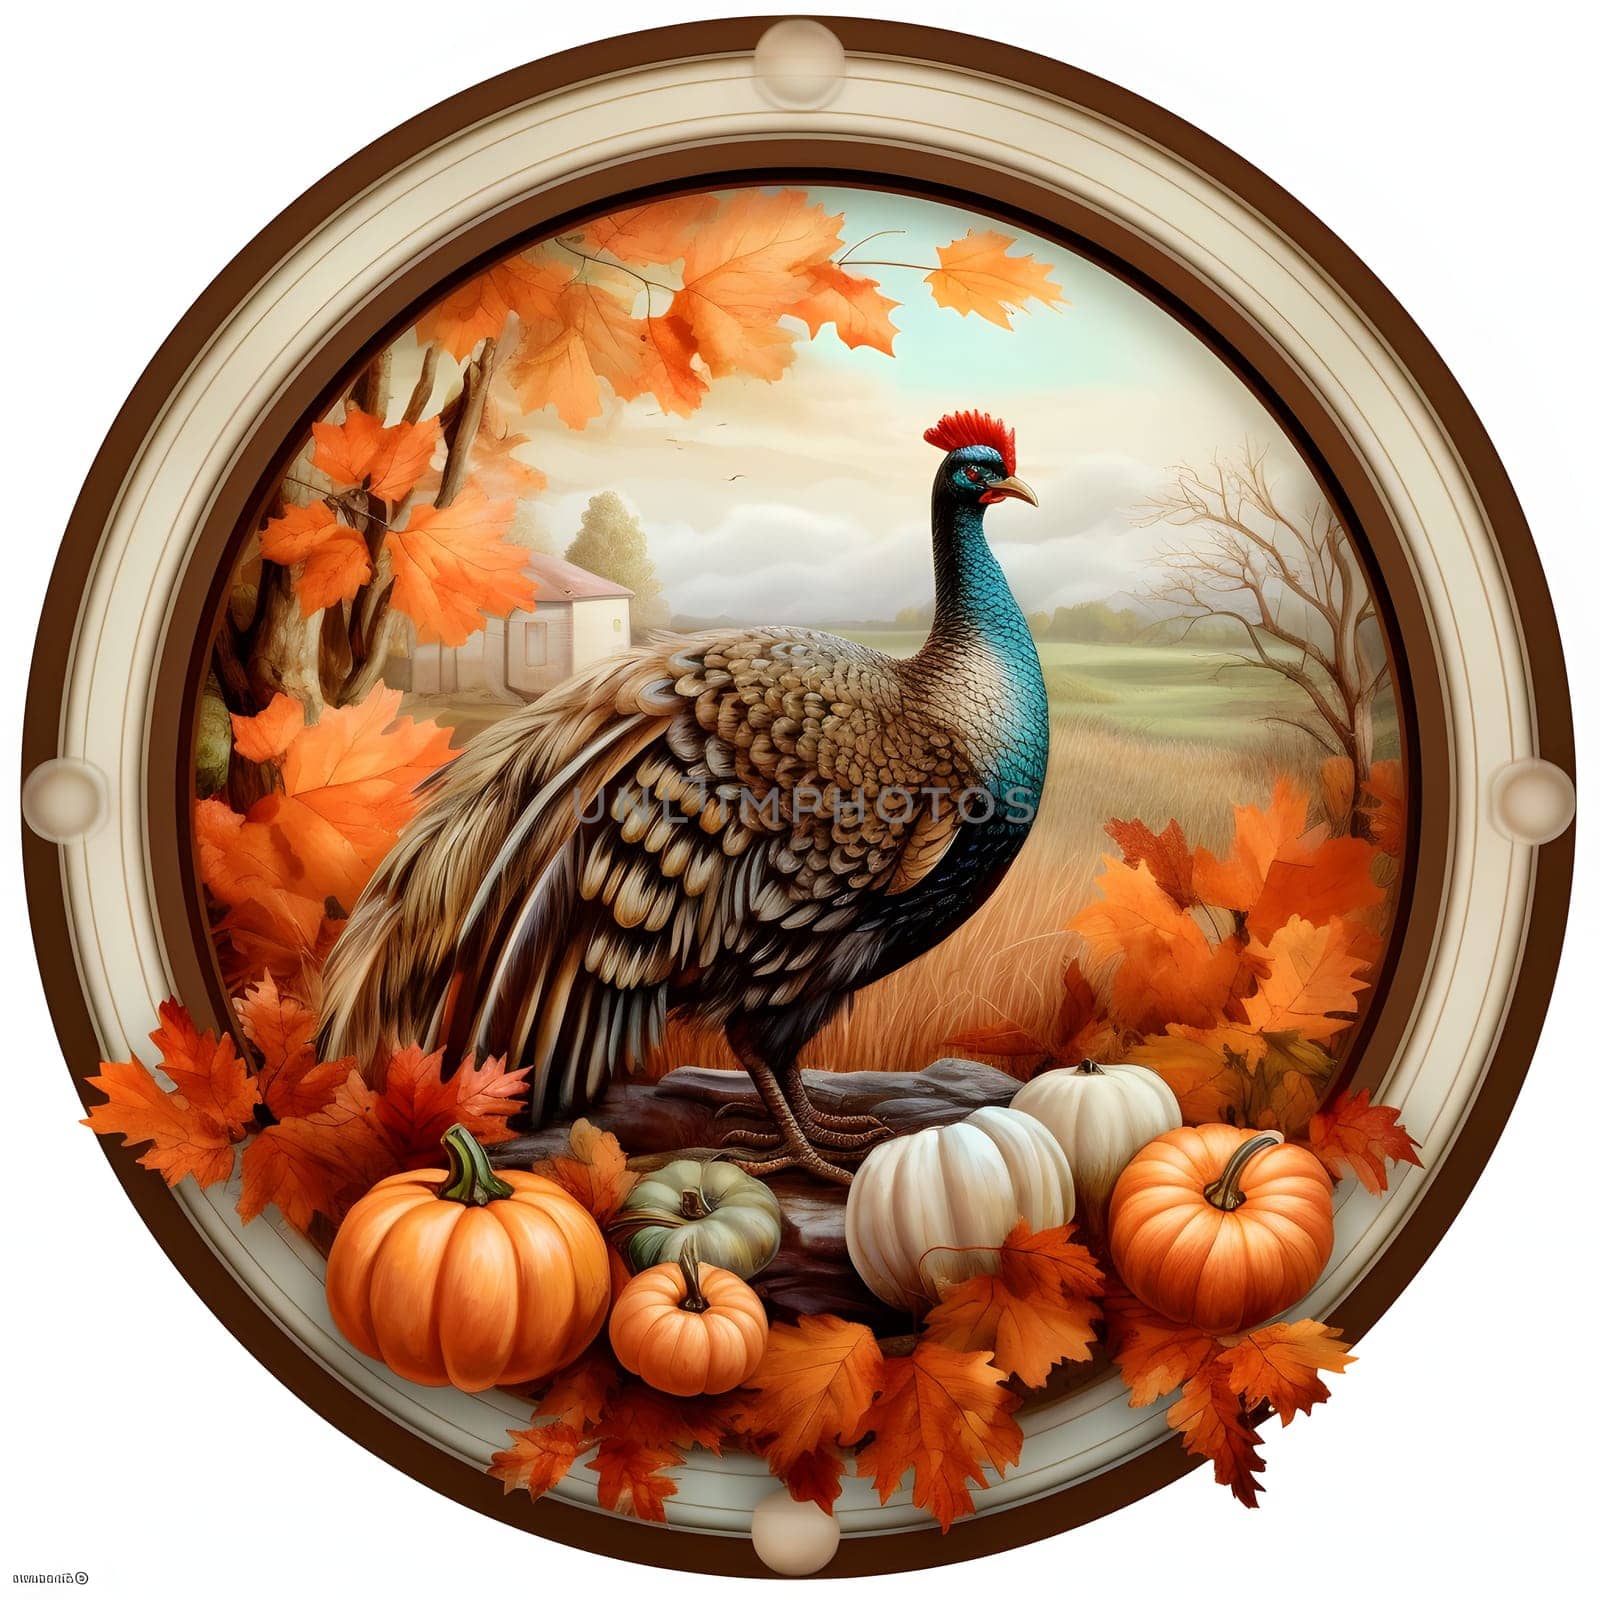 A circle, a medal, a sticker, and a turkey, pumpkins and autumn leaves. Turkey as the main dish of thanksgiving for the harvest. by ThemesS